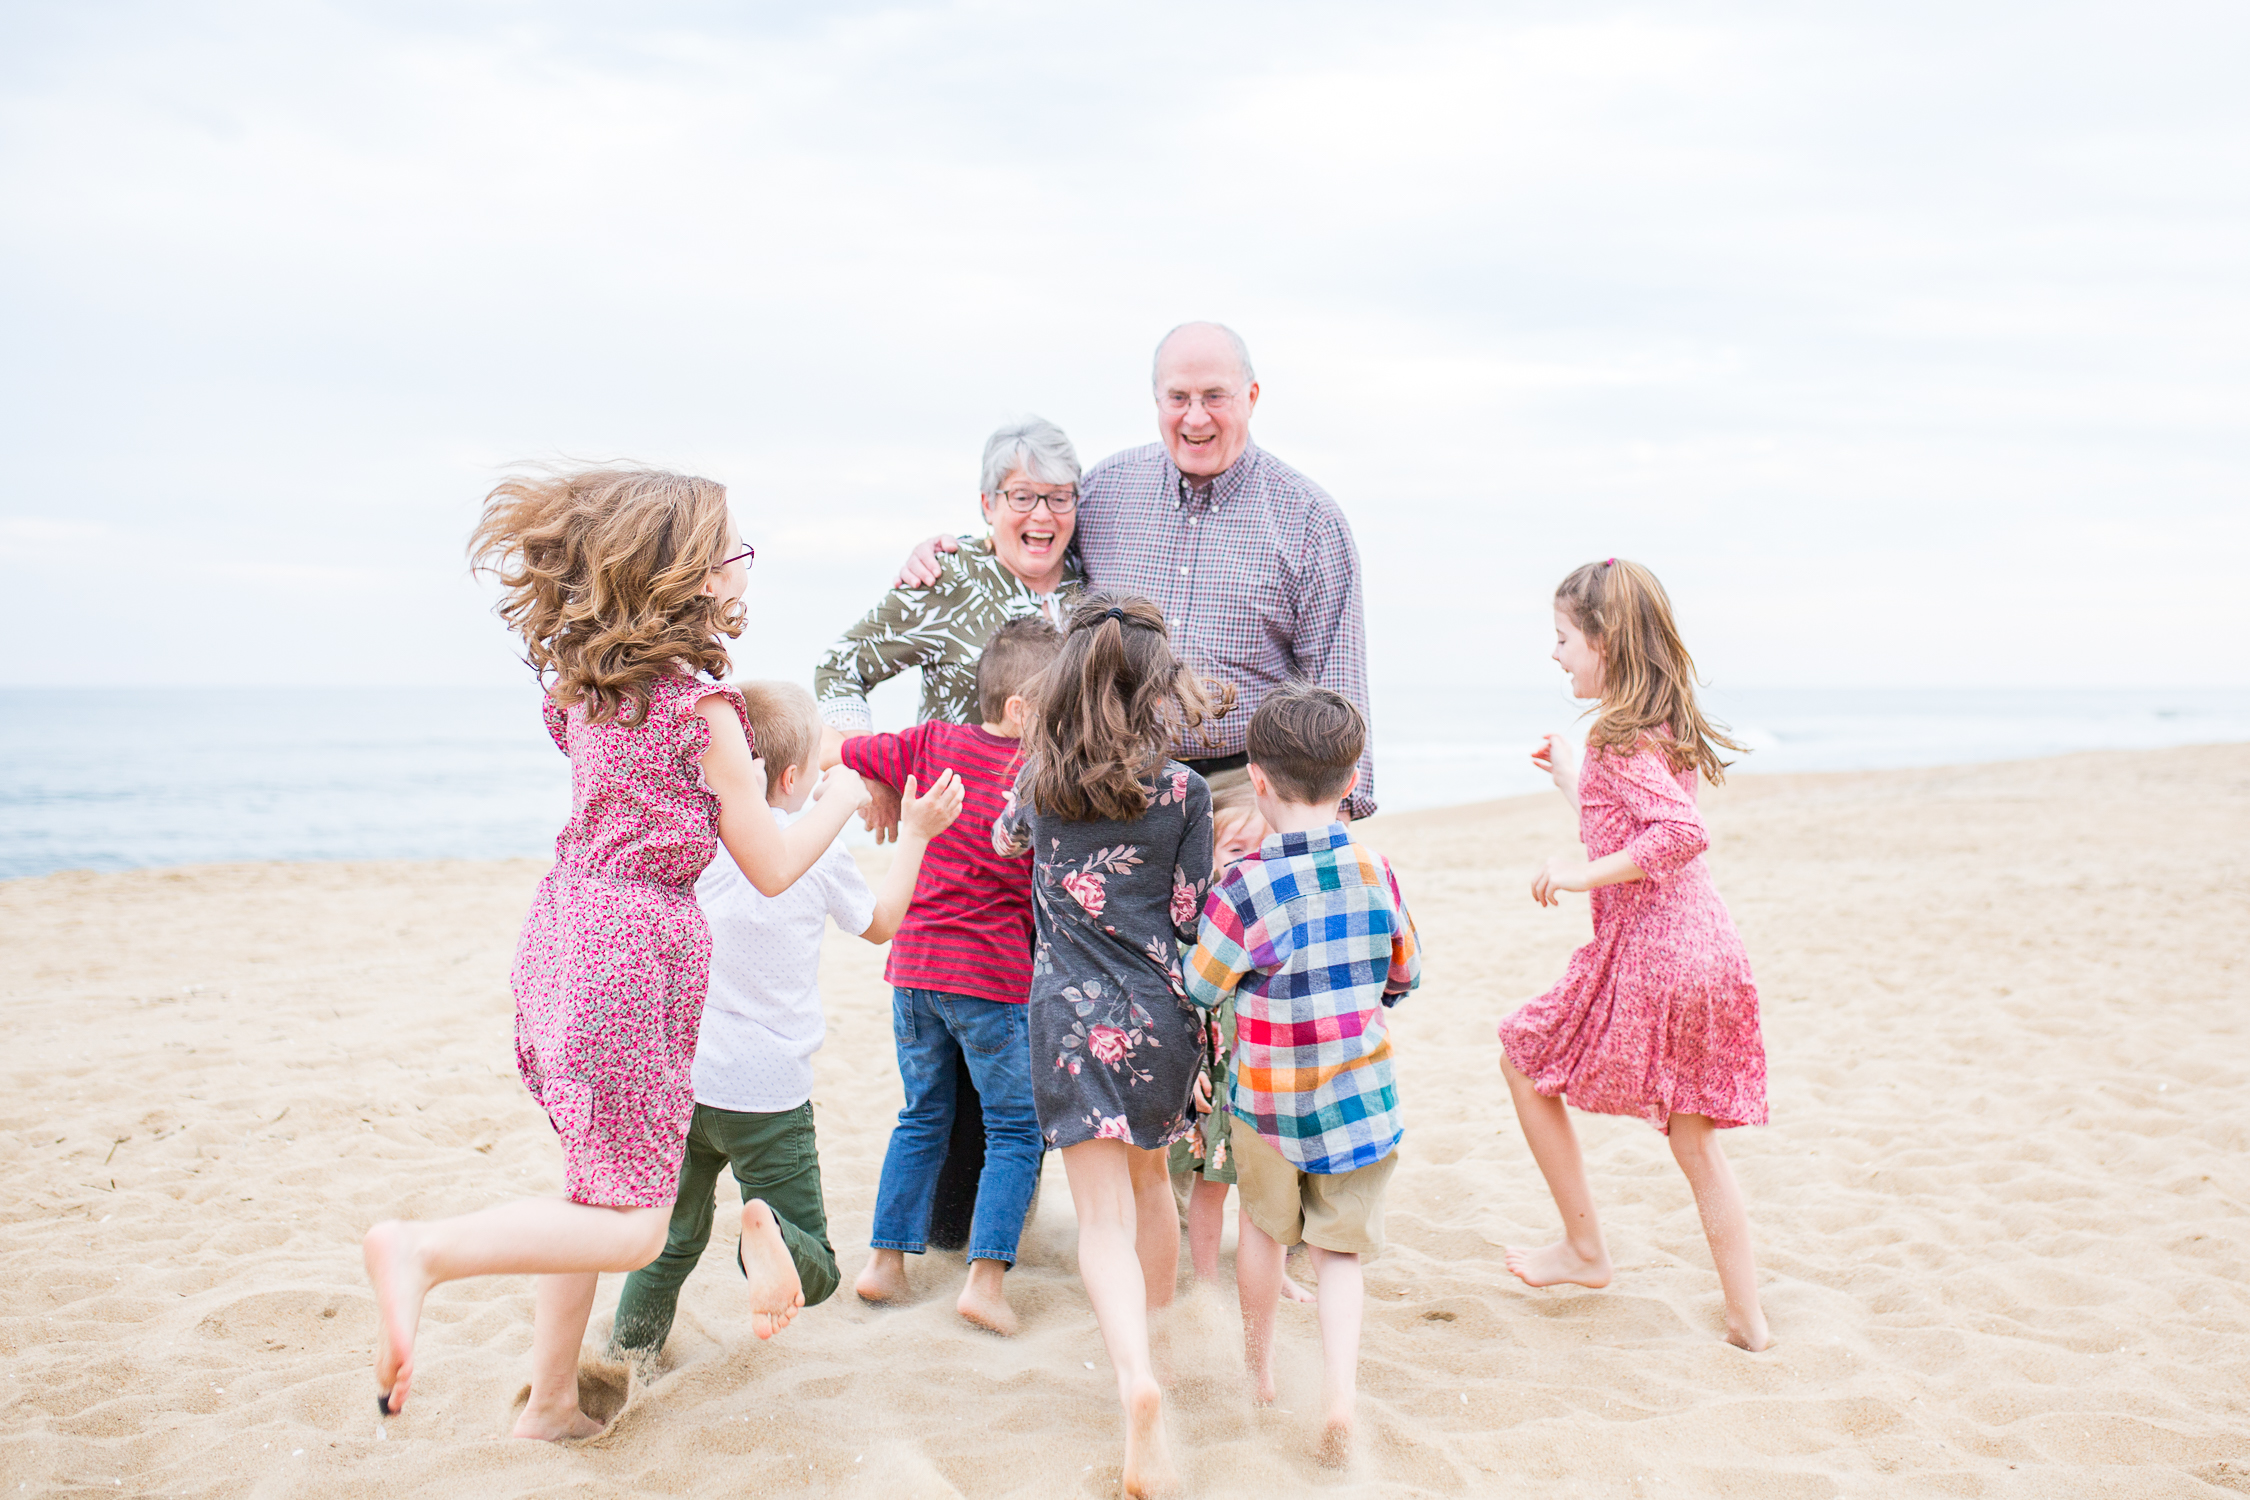 Virginia beach family photographer for extended beach photo sessions by alison bell photographer